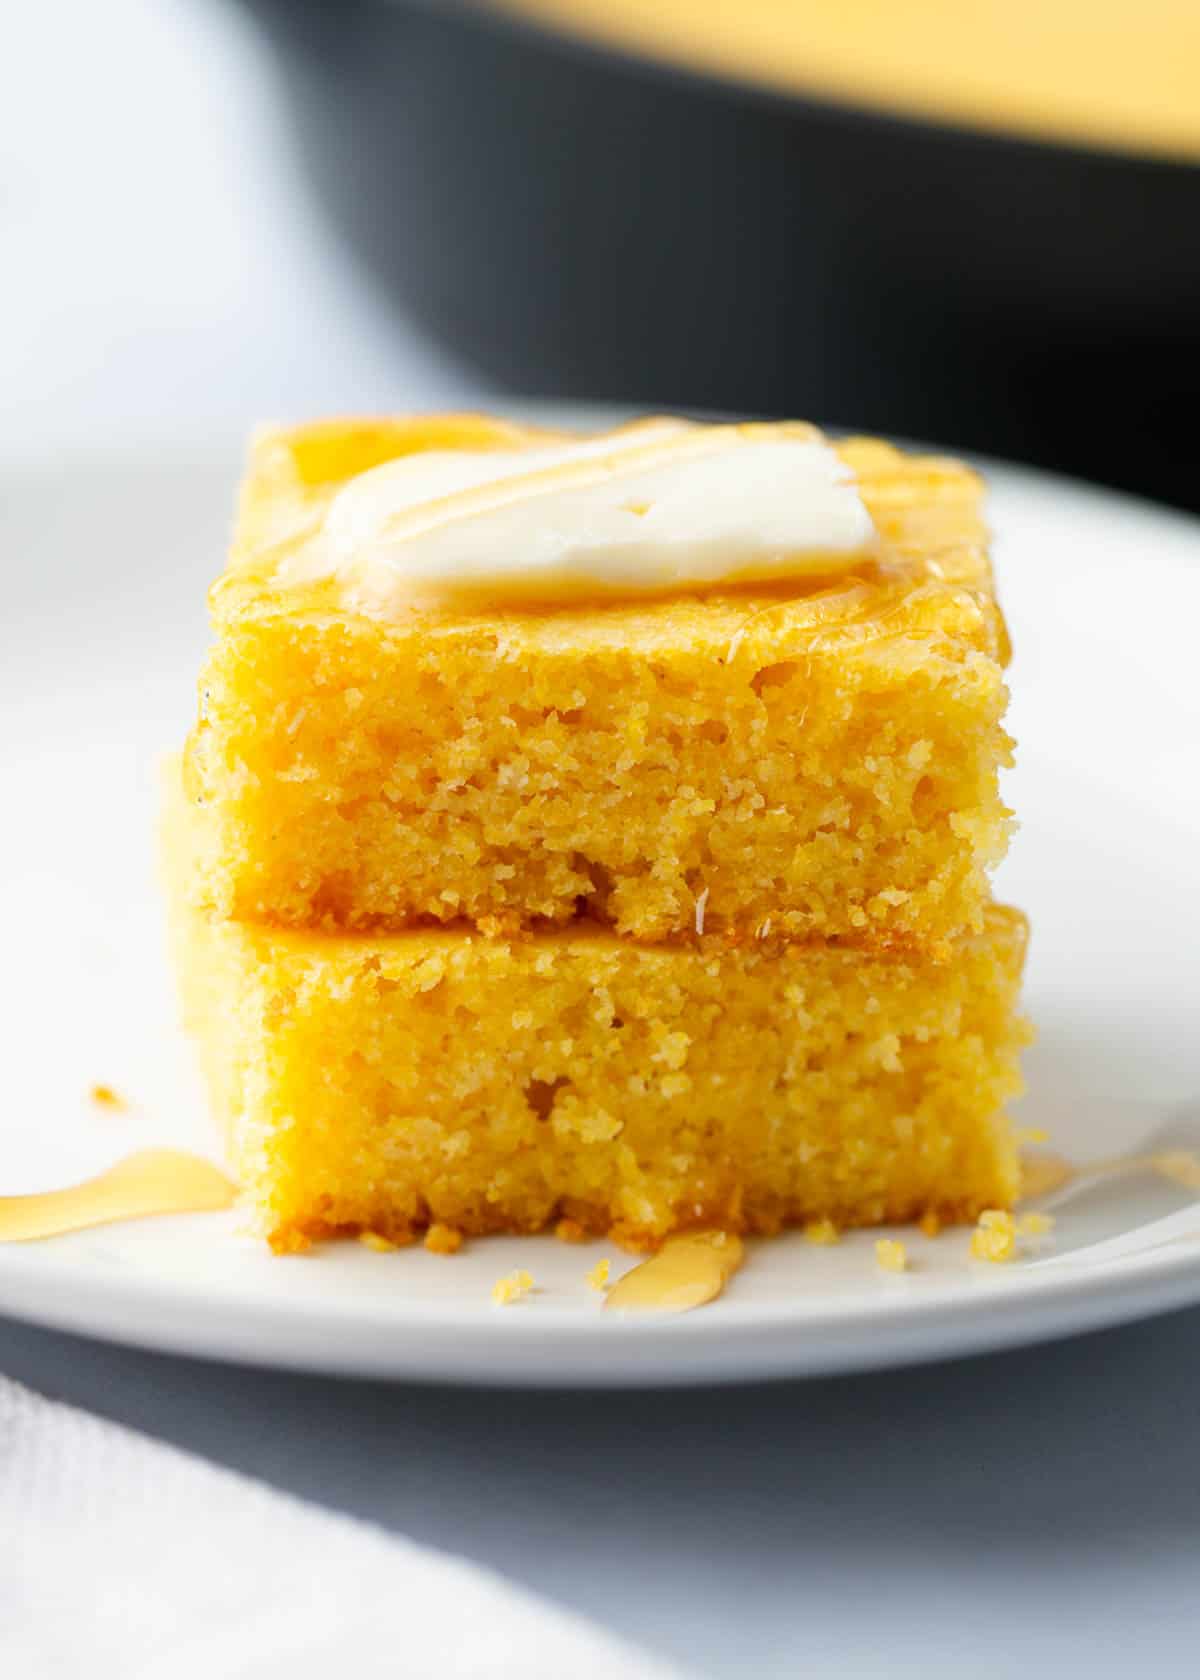 Stacked cornbread on a plate.